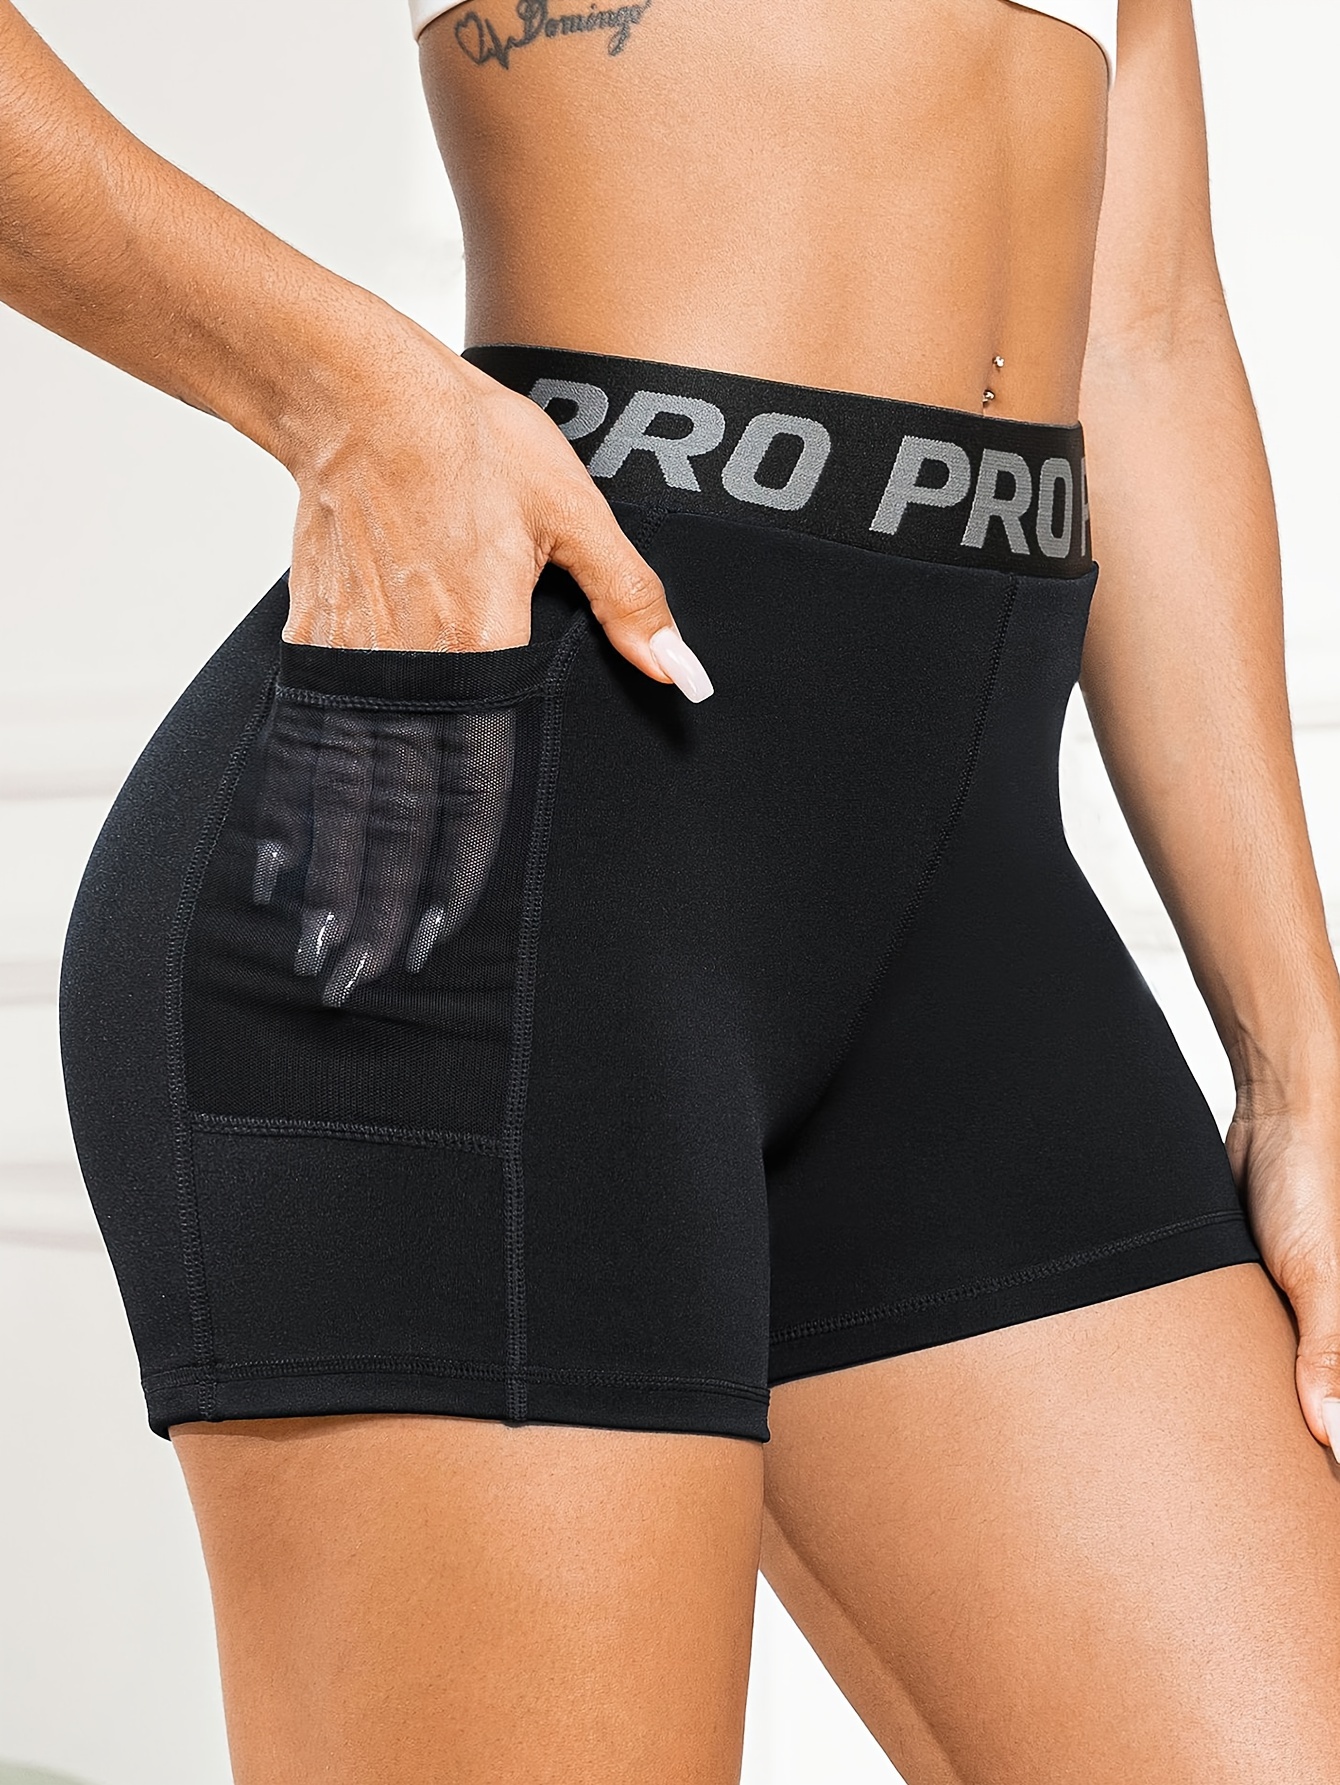 Women Activewear Workout Bike Yoga Shorts with Pocket Stretch High